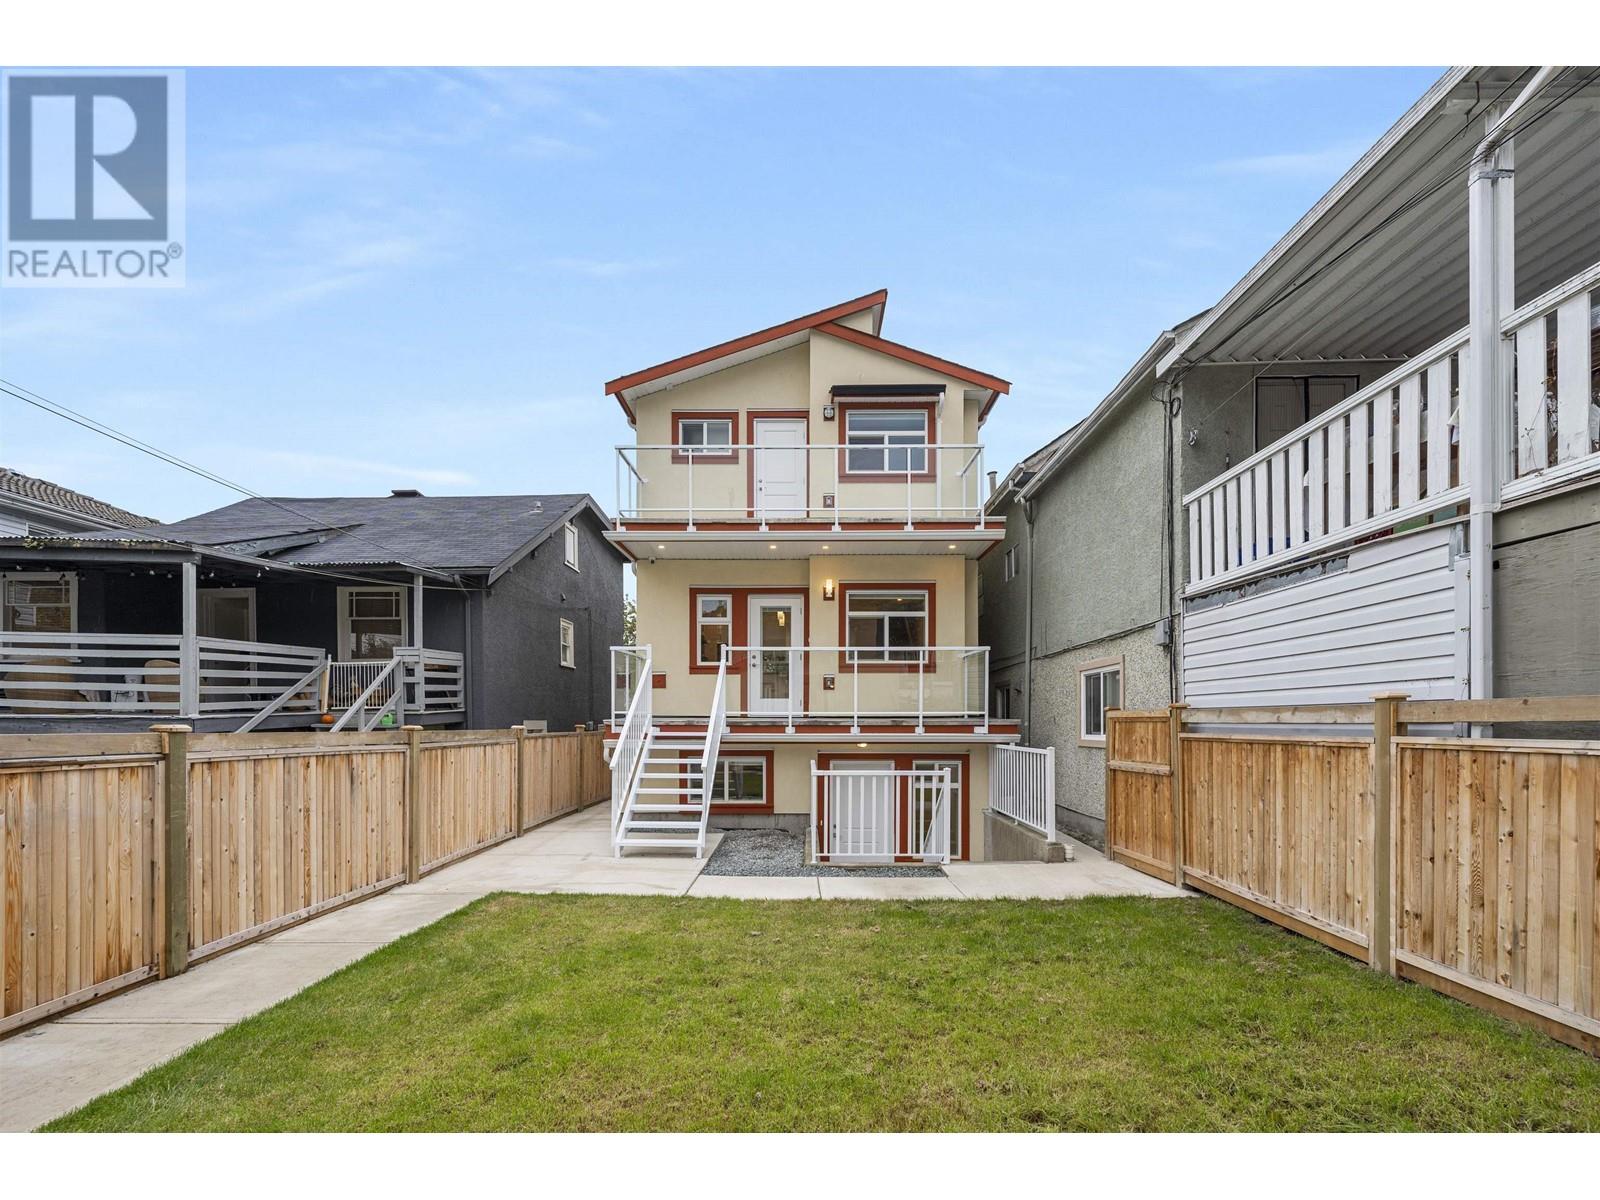 Listing Picture 29 of 37 : 530 E 18TH AVENUE, Vancouver / 溫哥華 - 魯藝地產 Yvonne Lu Group - MLS Medallion Club Member